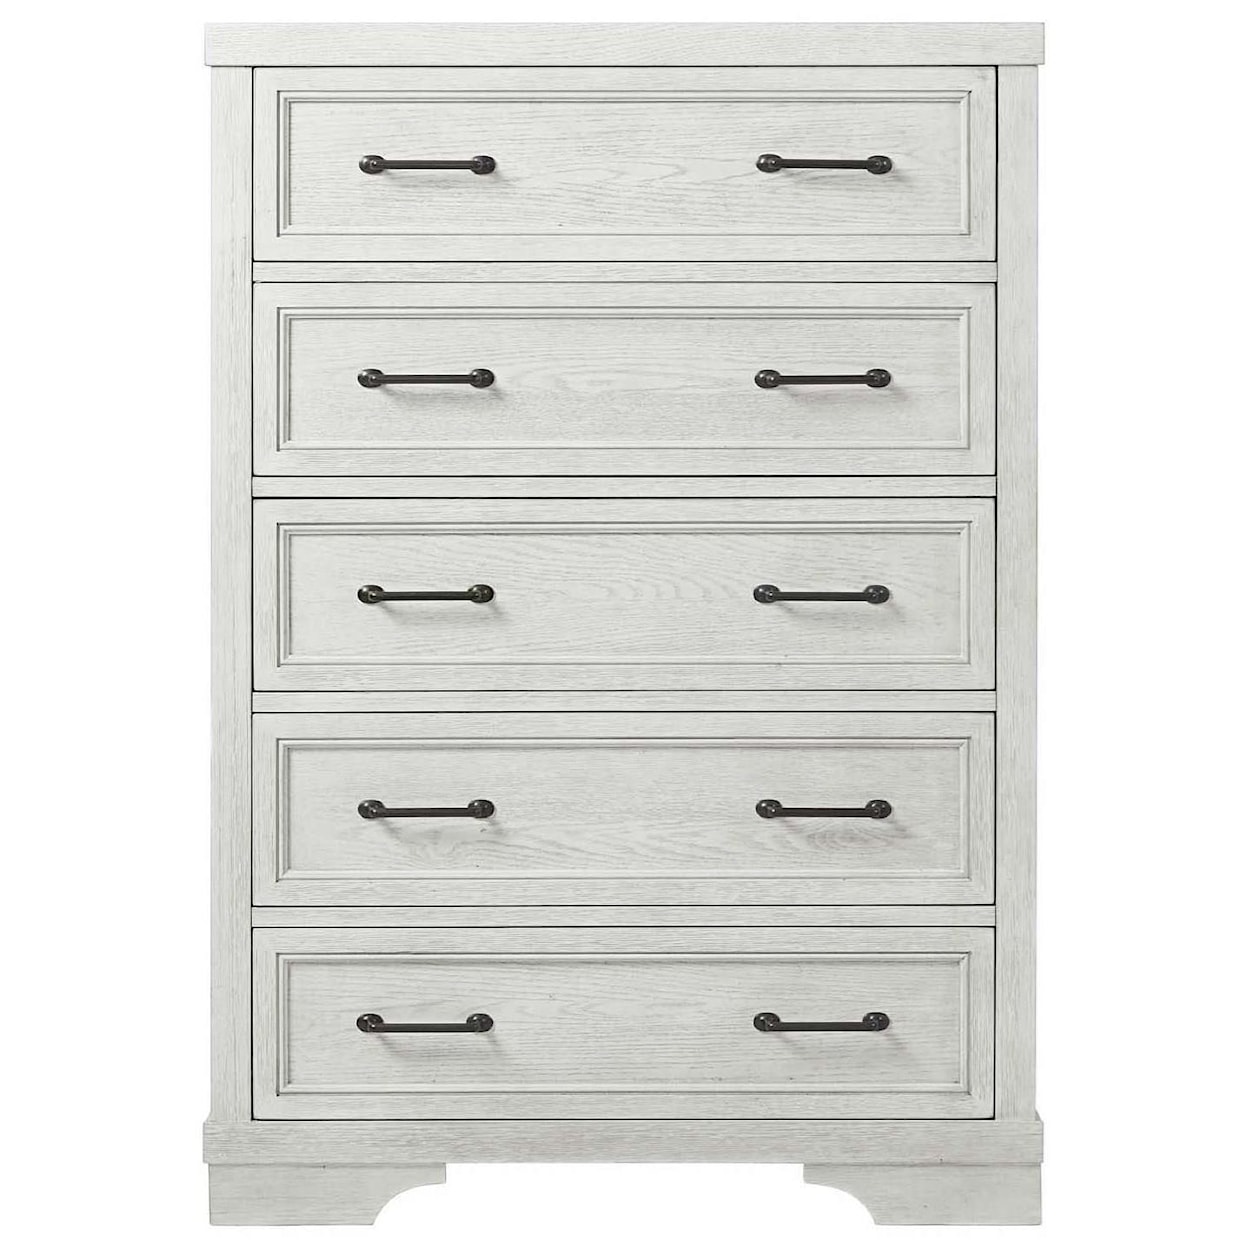 Westwood Design Foundry 5 Drawer Chest